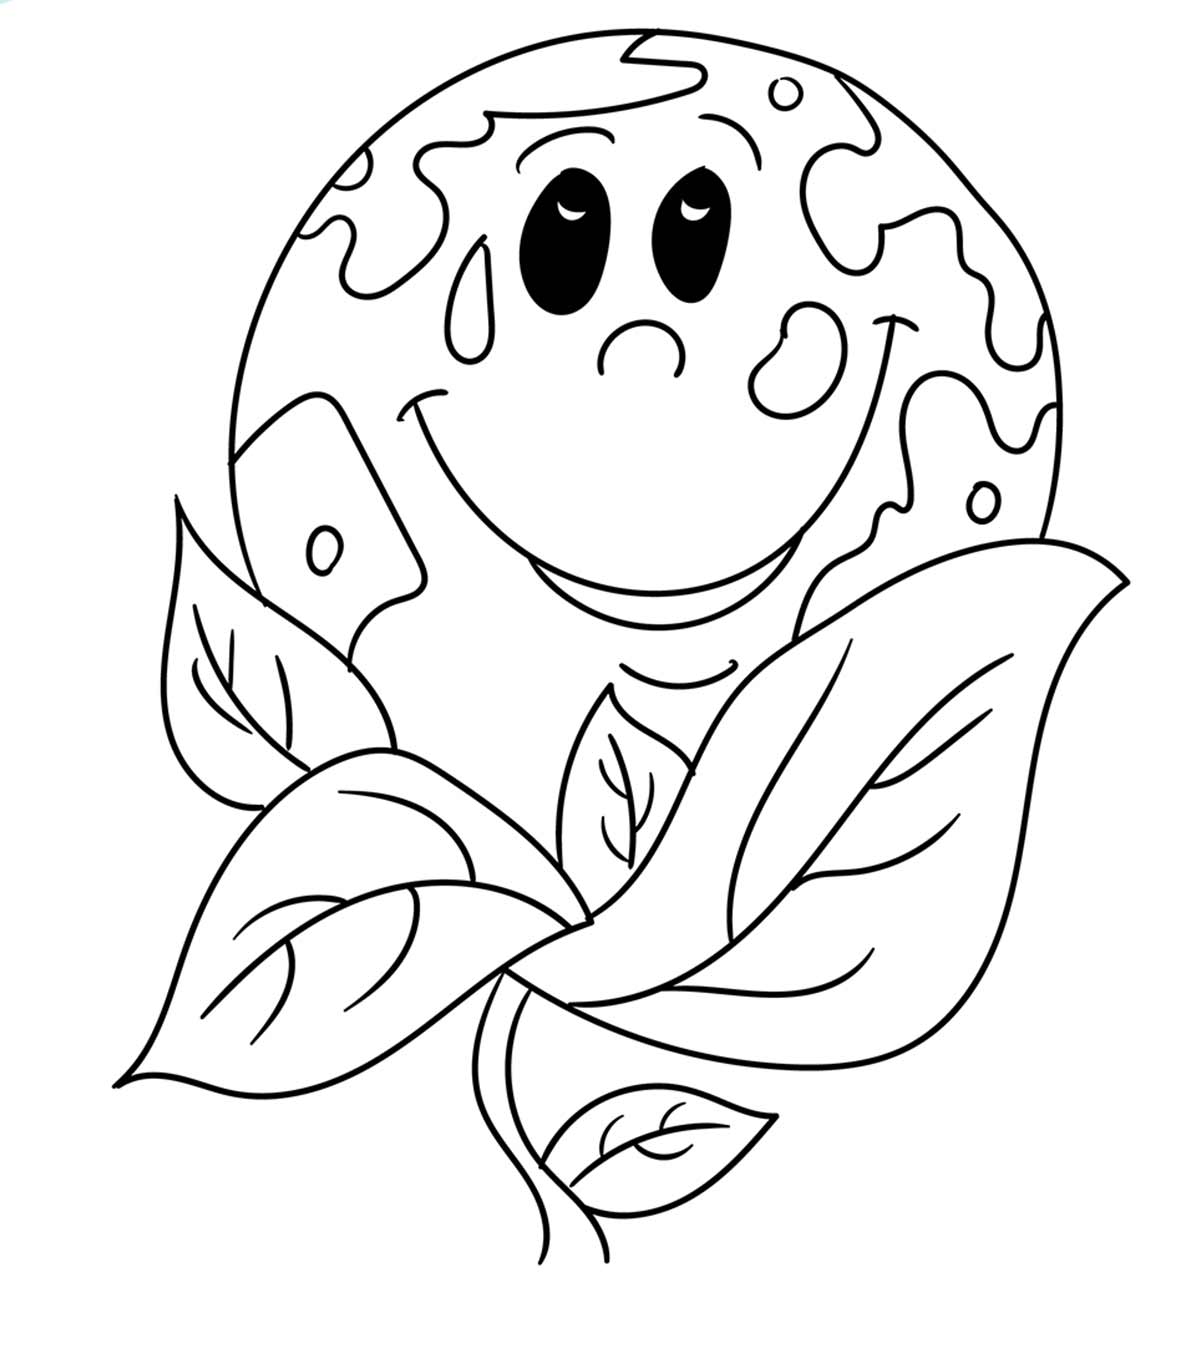 Top 15 Earth Coloring Pages For Your Toddler